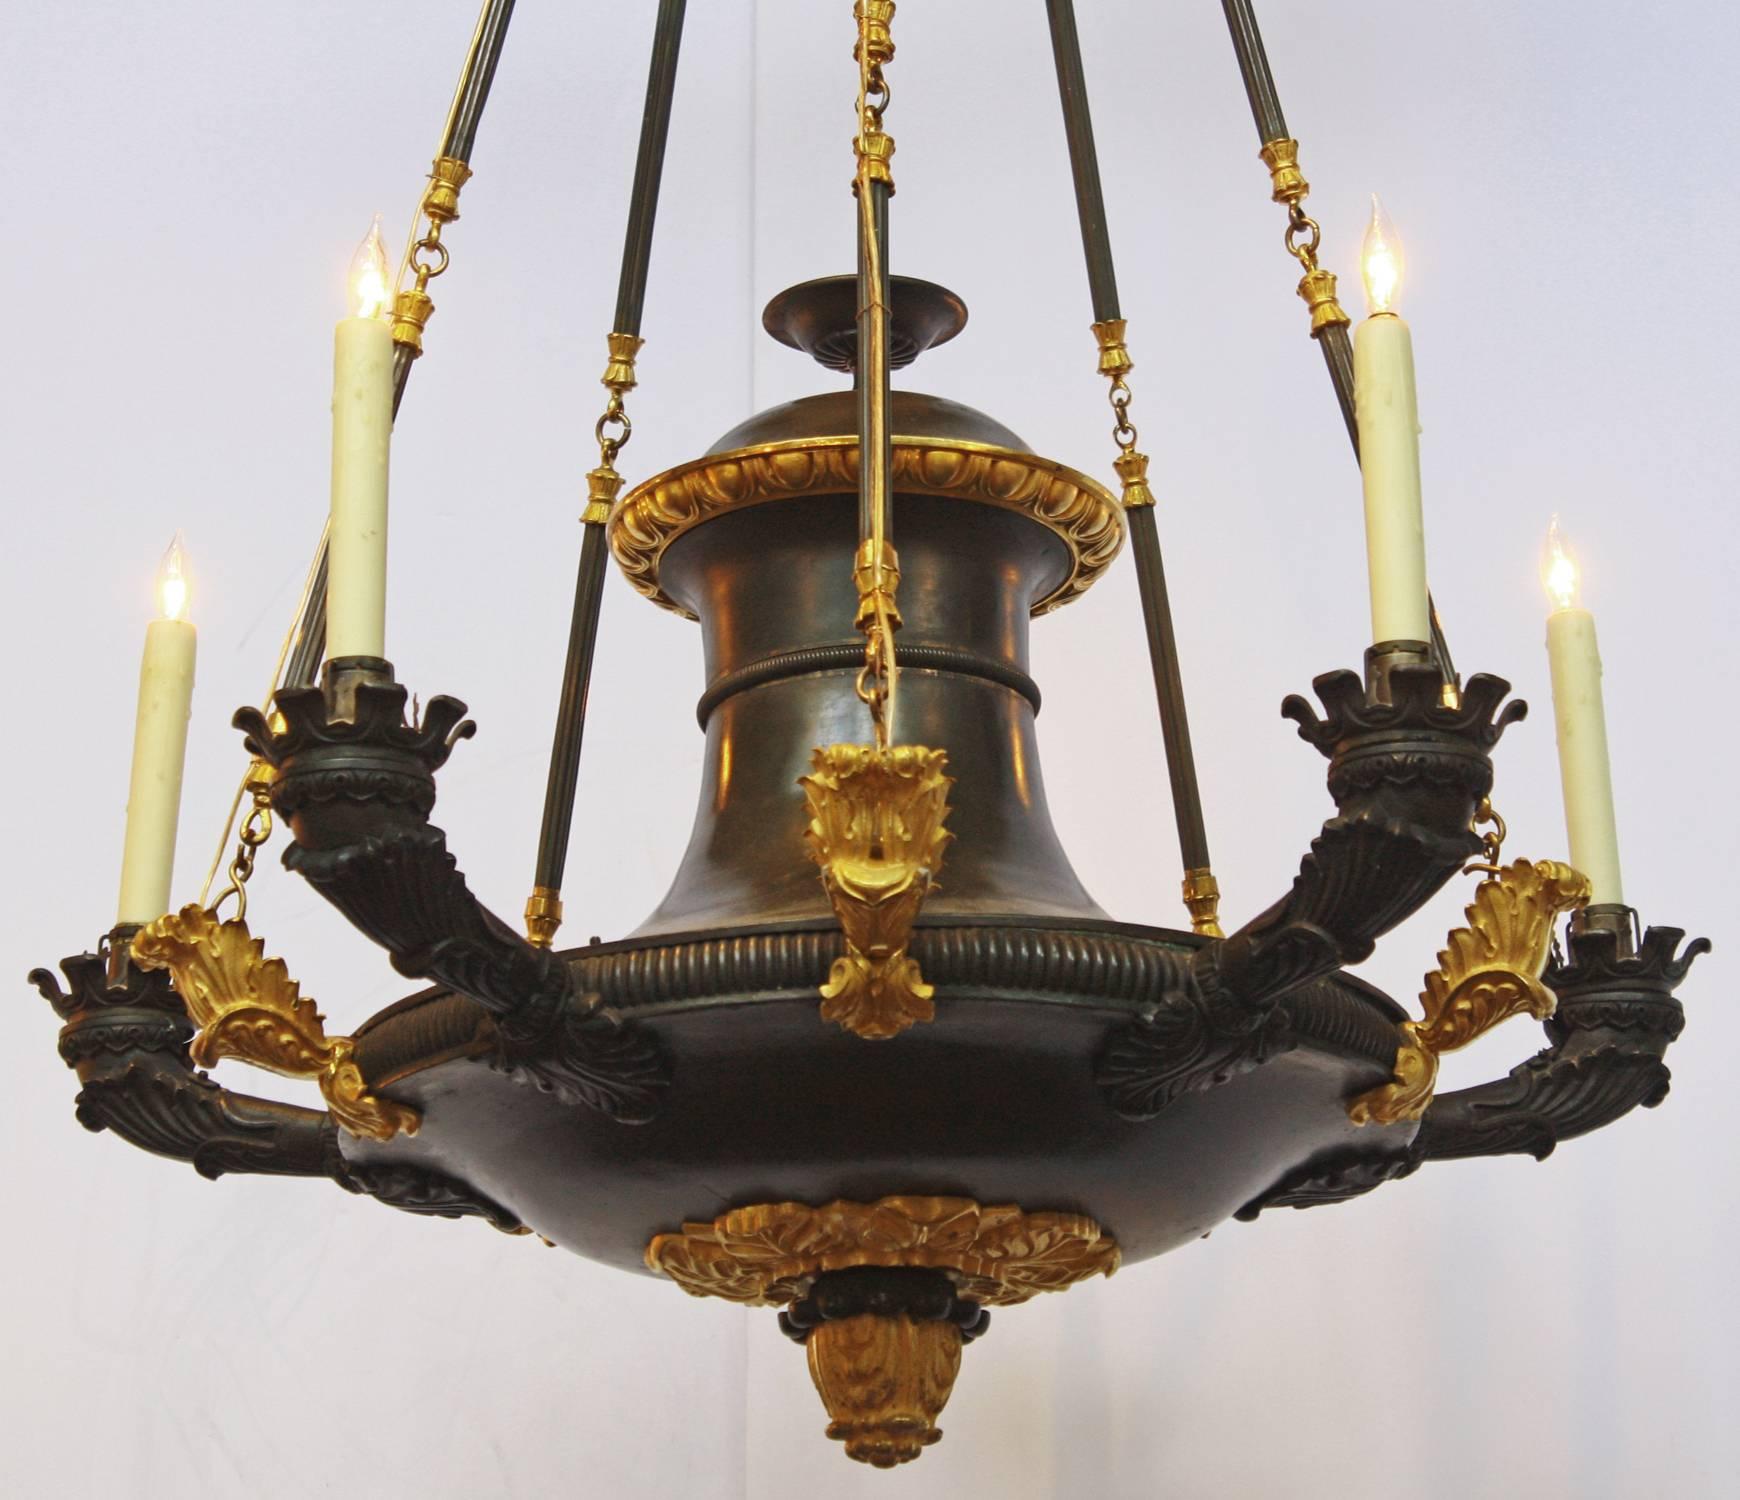 A French Empire patinated and gilt bronze five-arm Argon chandelier with a bowl base with five arms and five supports with leaf forms at their base, which has been converted to electricity.